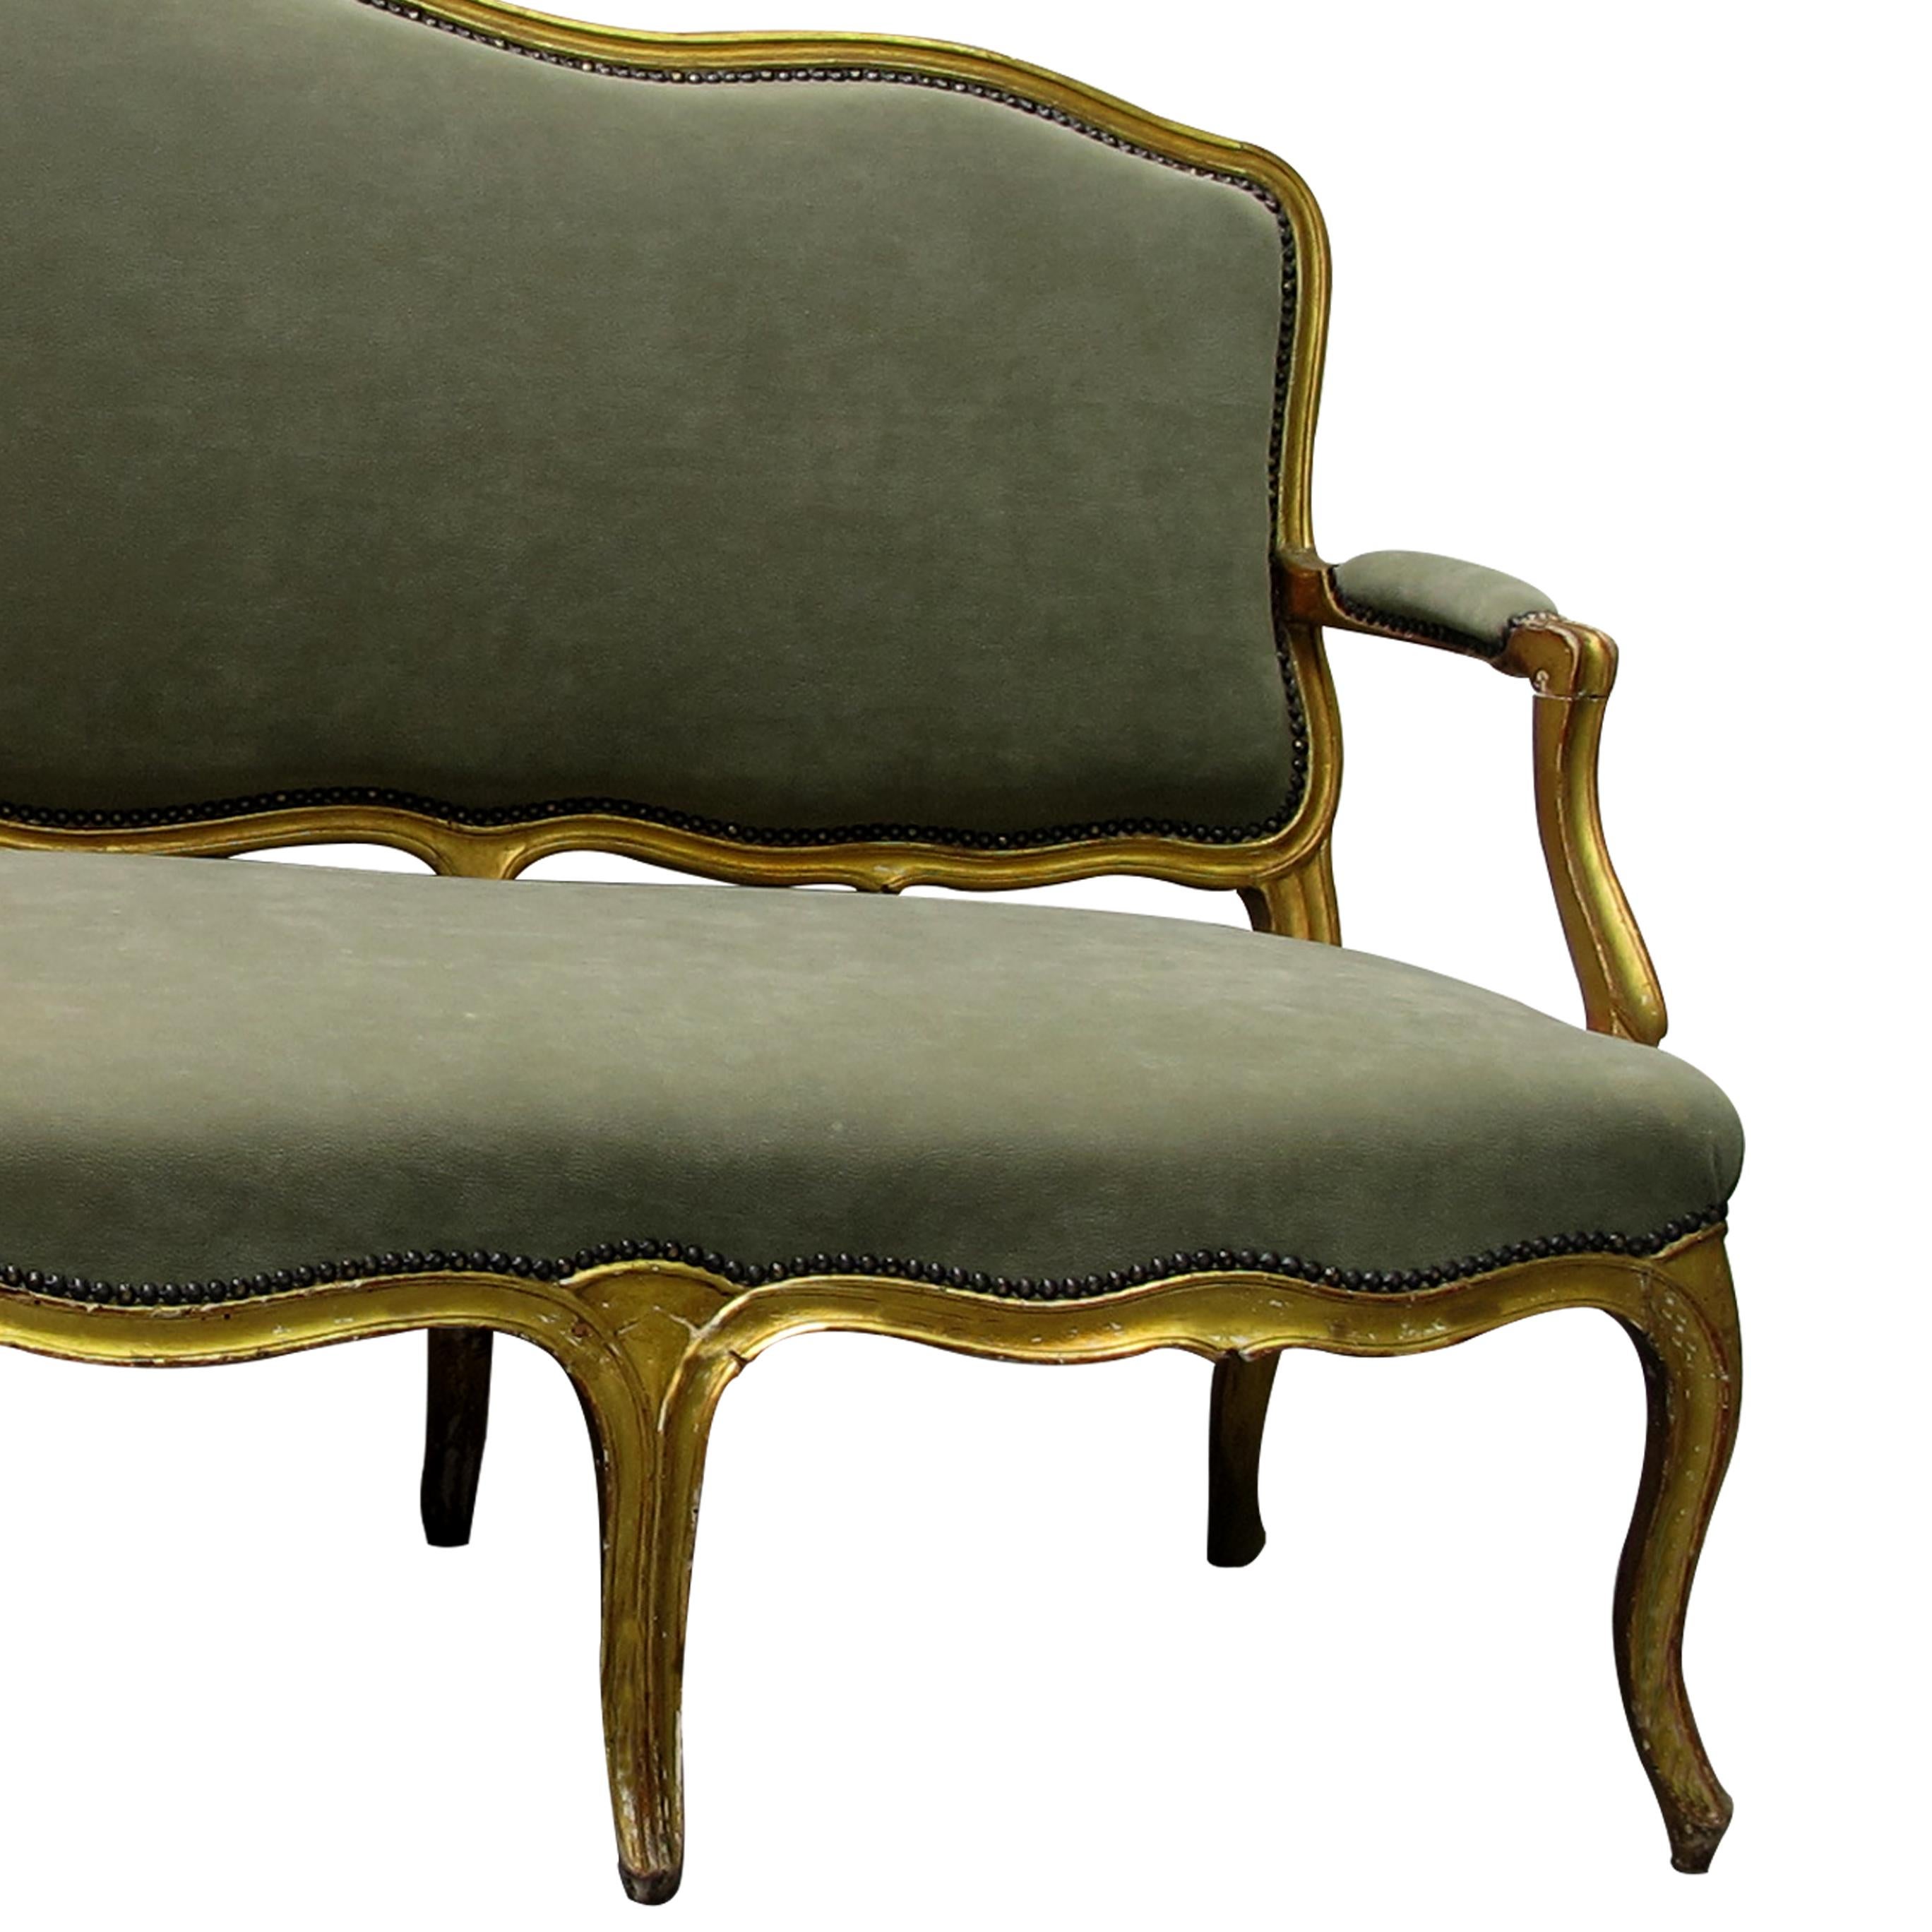 Late 19th Century French Gilt Carved Wood Canapé, Sofa Louis XV Style 1